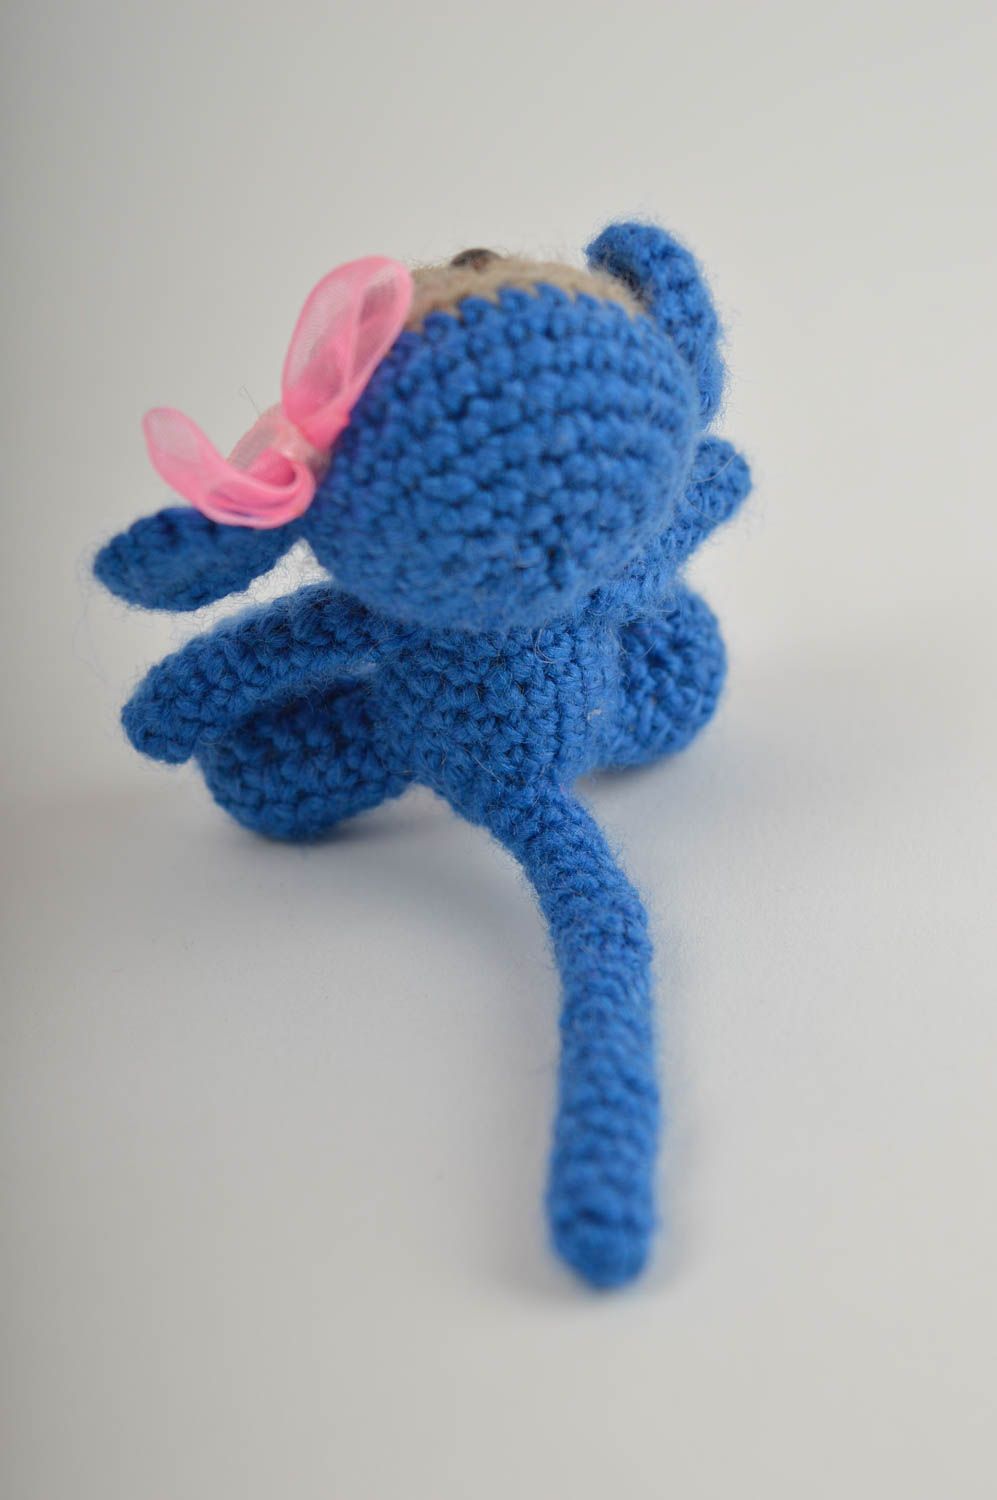 Knitted stuffed blue little monkey girl. 3,5 inches tall photo 3